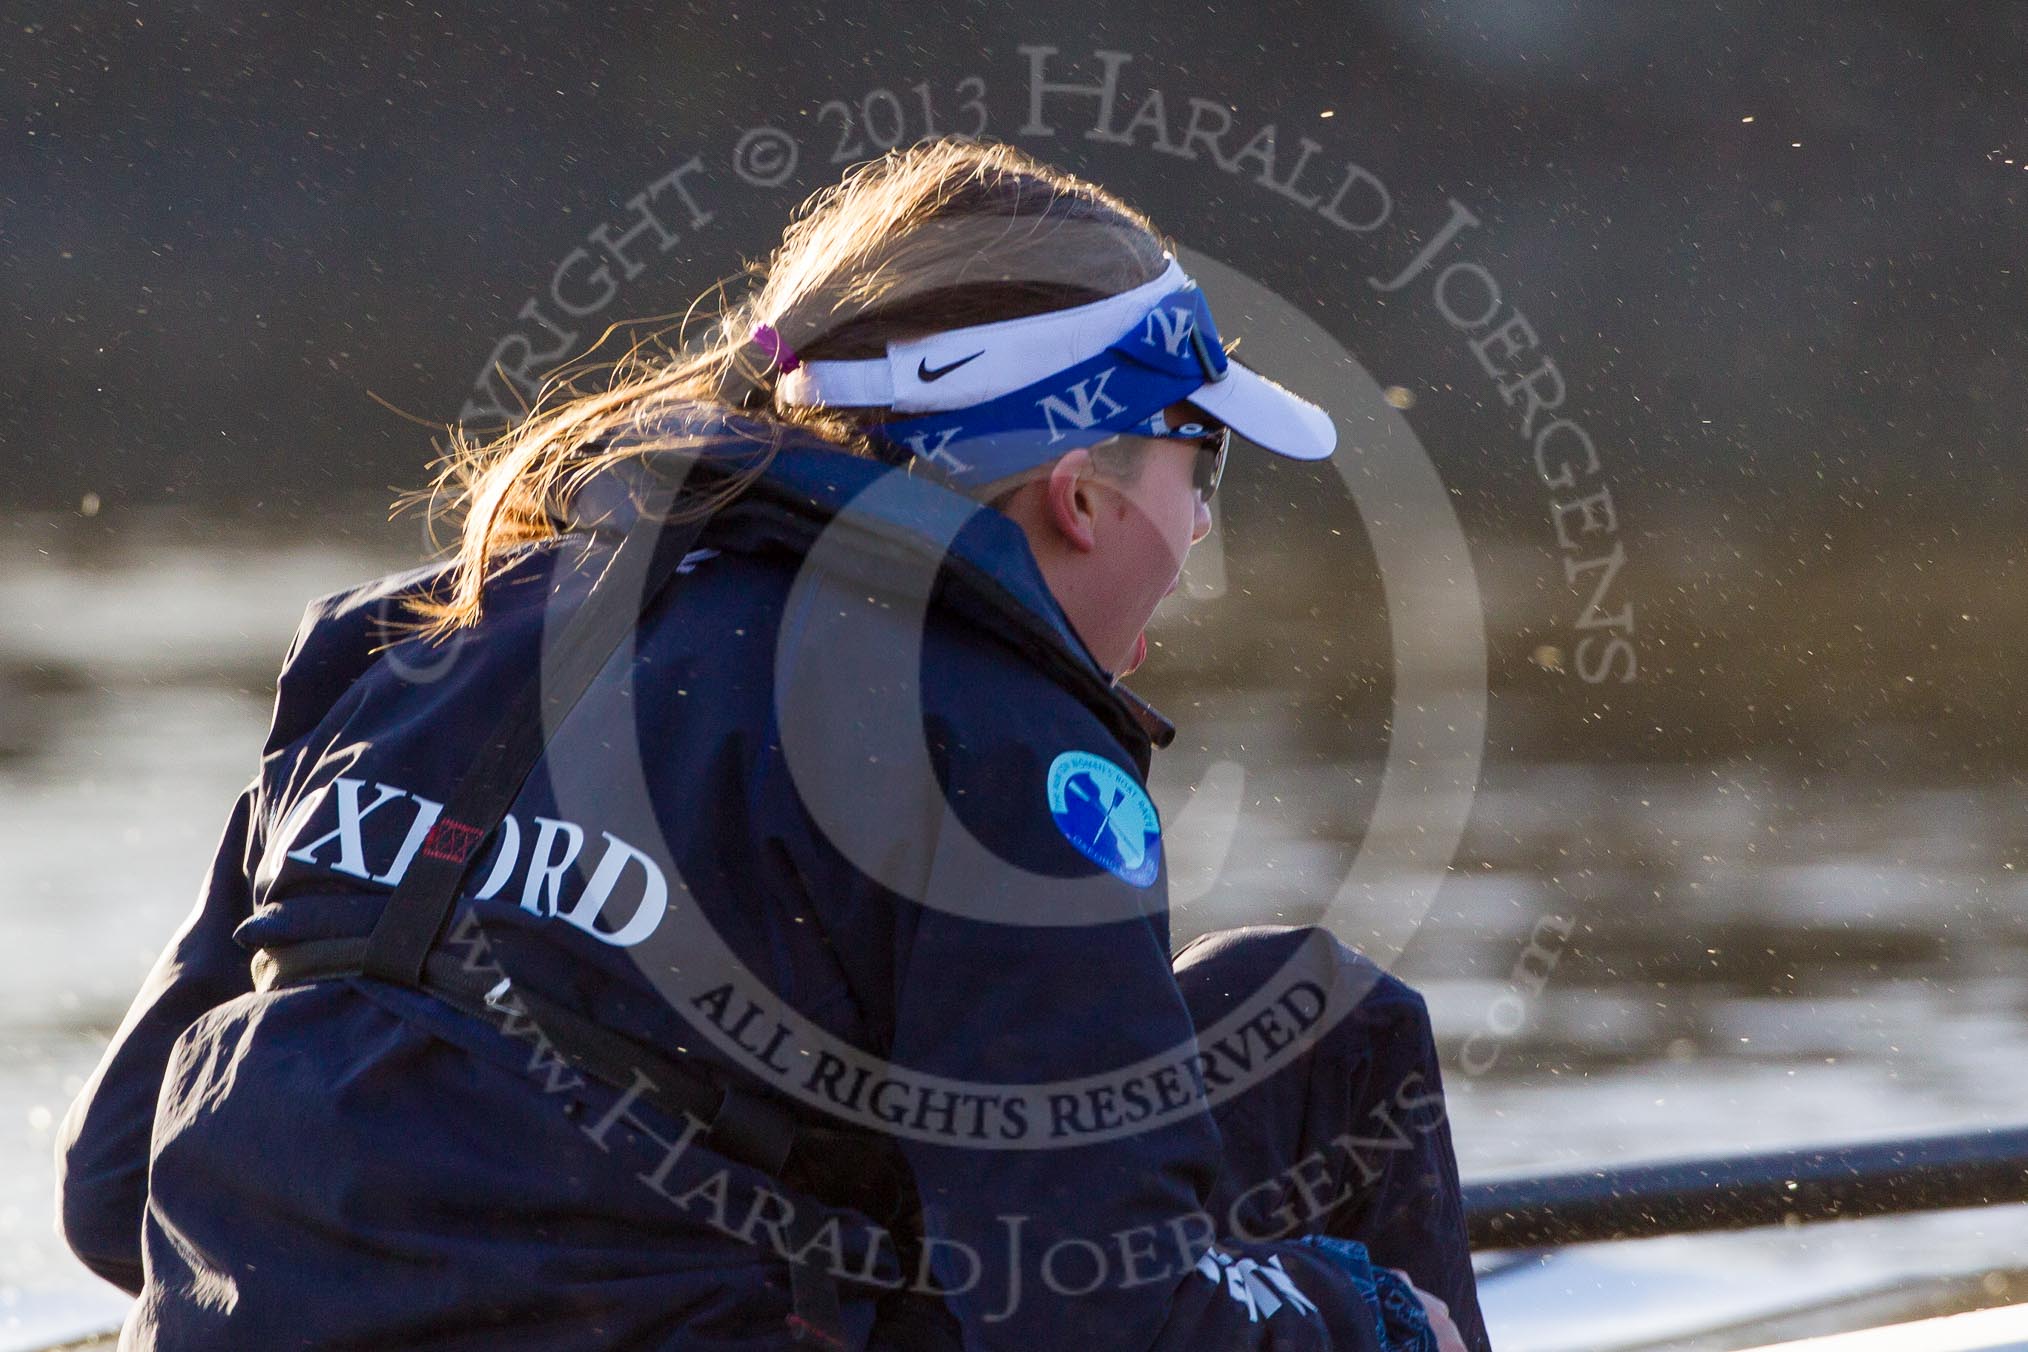 The Boat Race season 2014 - Women's Trial VIIIs (OUWBC, Oxford): Cleopatra: Cox Olivia Cleary..
River Thames between Putney Bridge and Mortlake,
London SW15,

United Kingdom,
on 19 December 2013 at 13:02, image #221